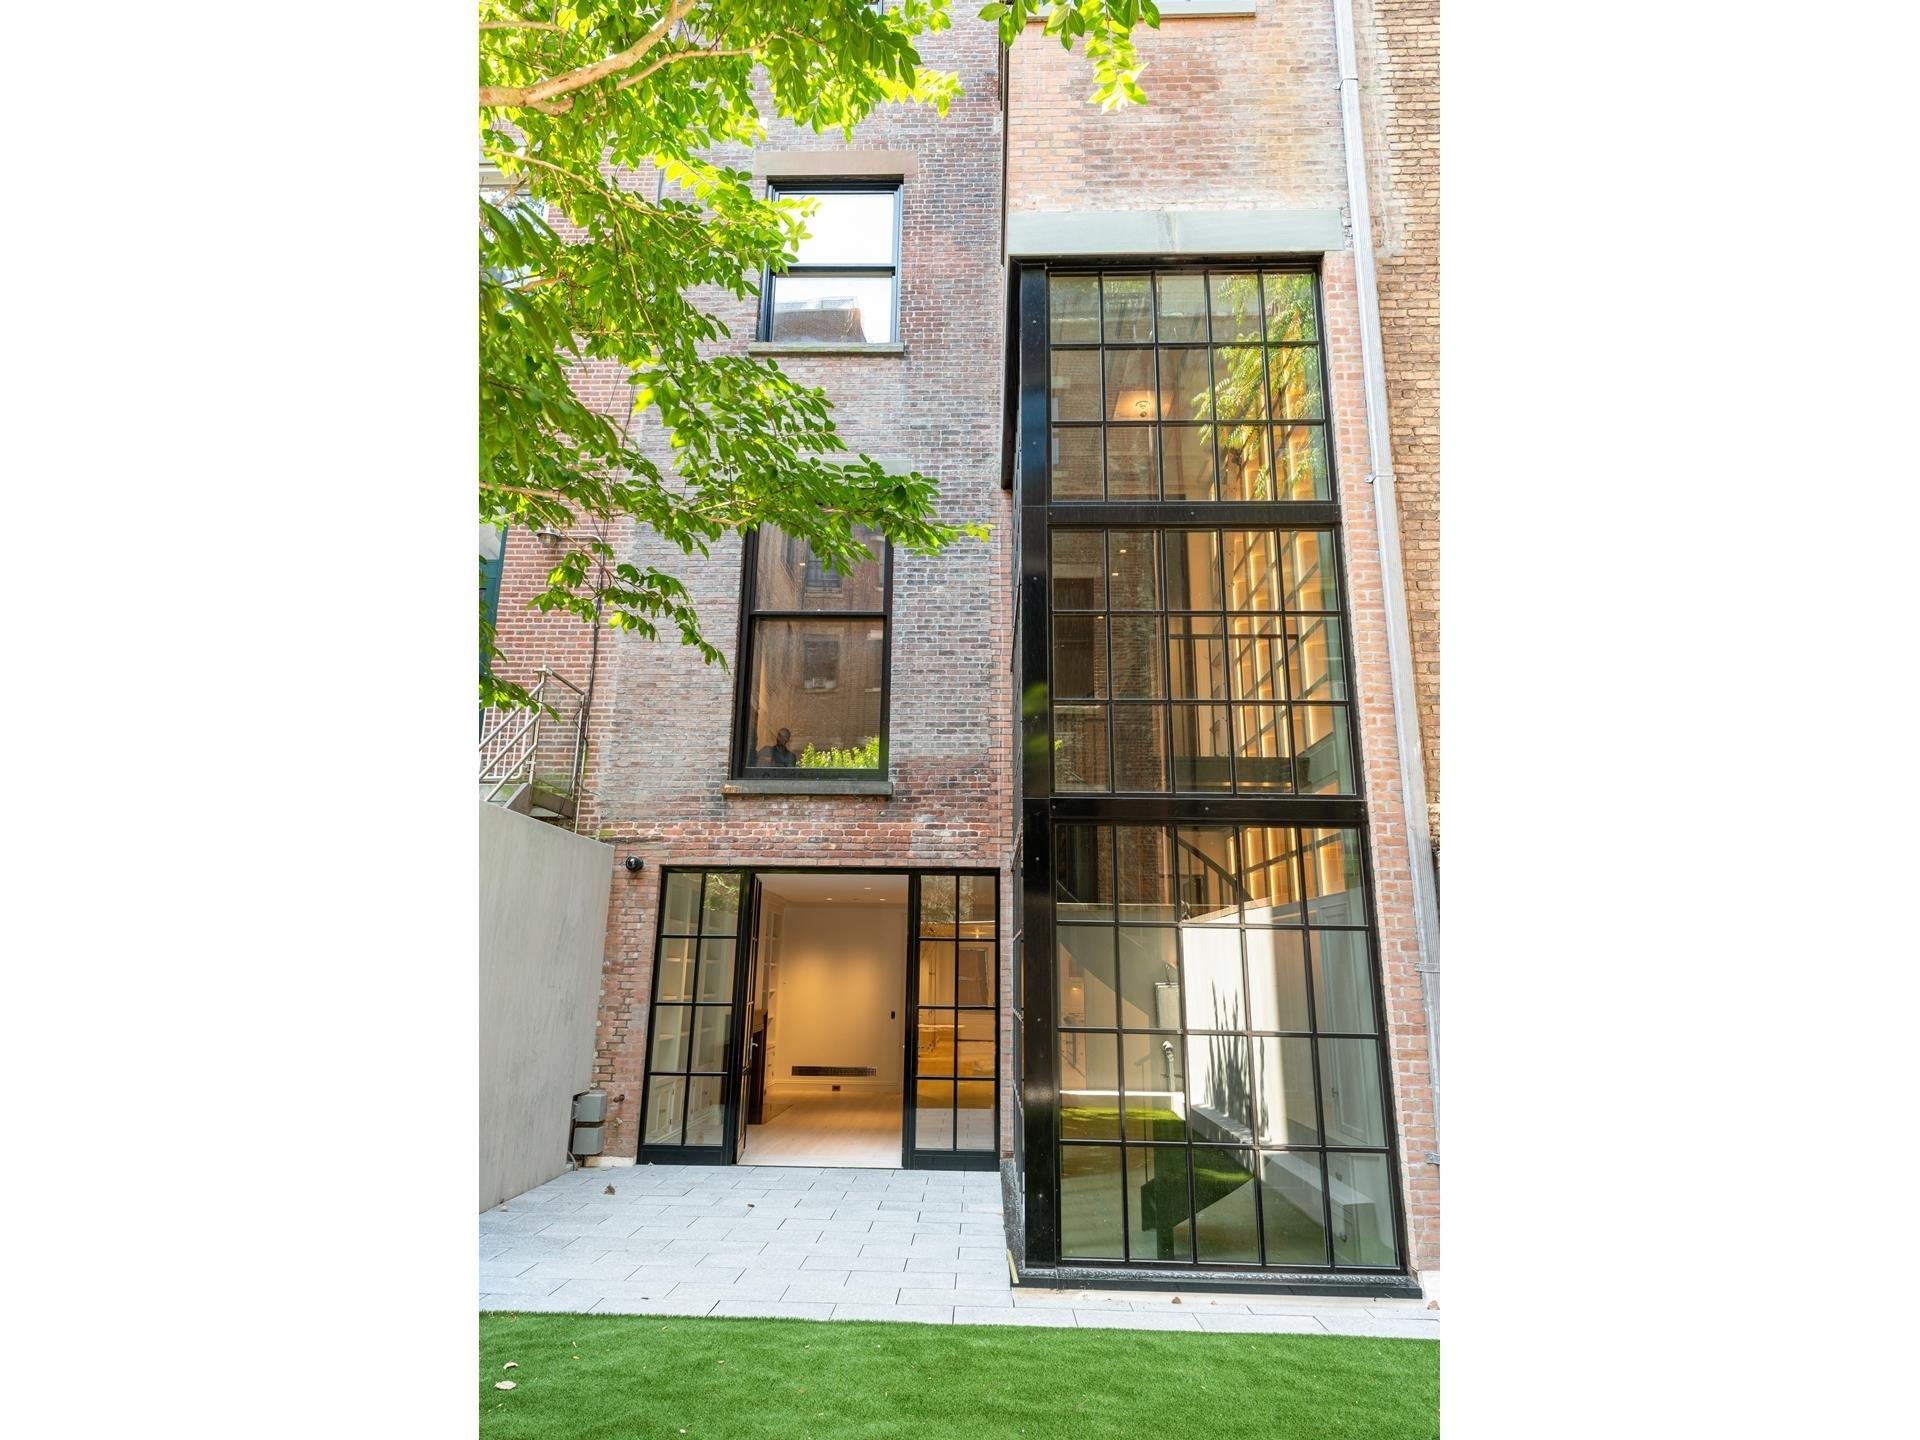 38. Single Family Townhouse for Sale at 43 W 73RD ST, TOWNHOUSE Upper West Side, New York, New York 10023